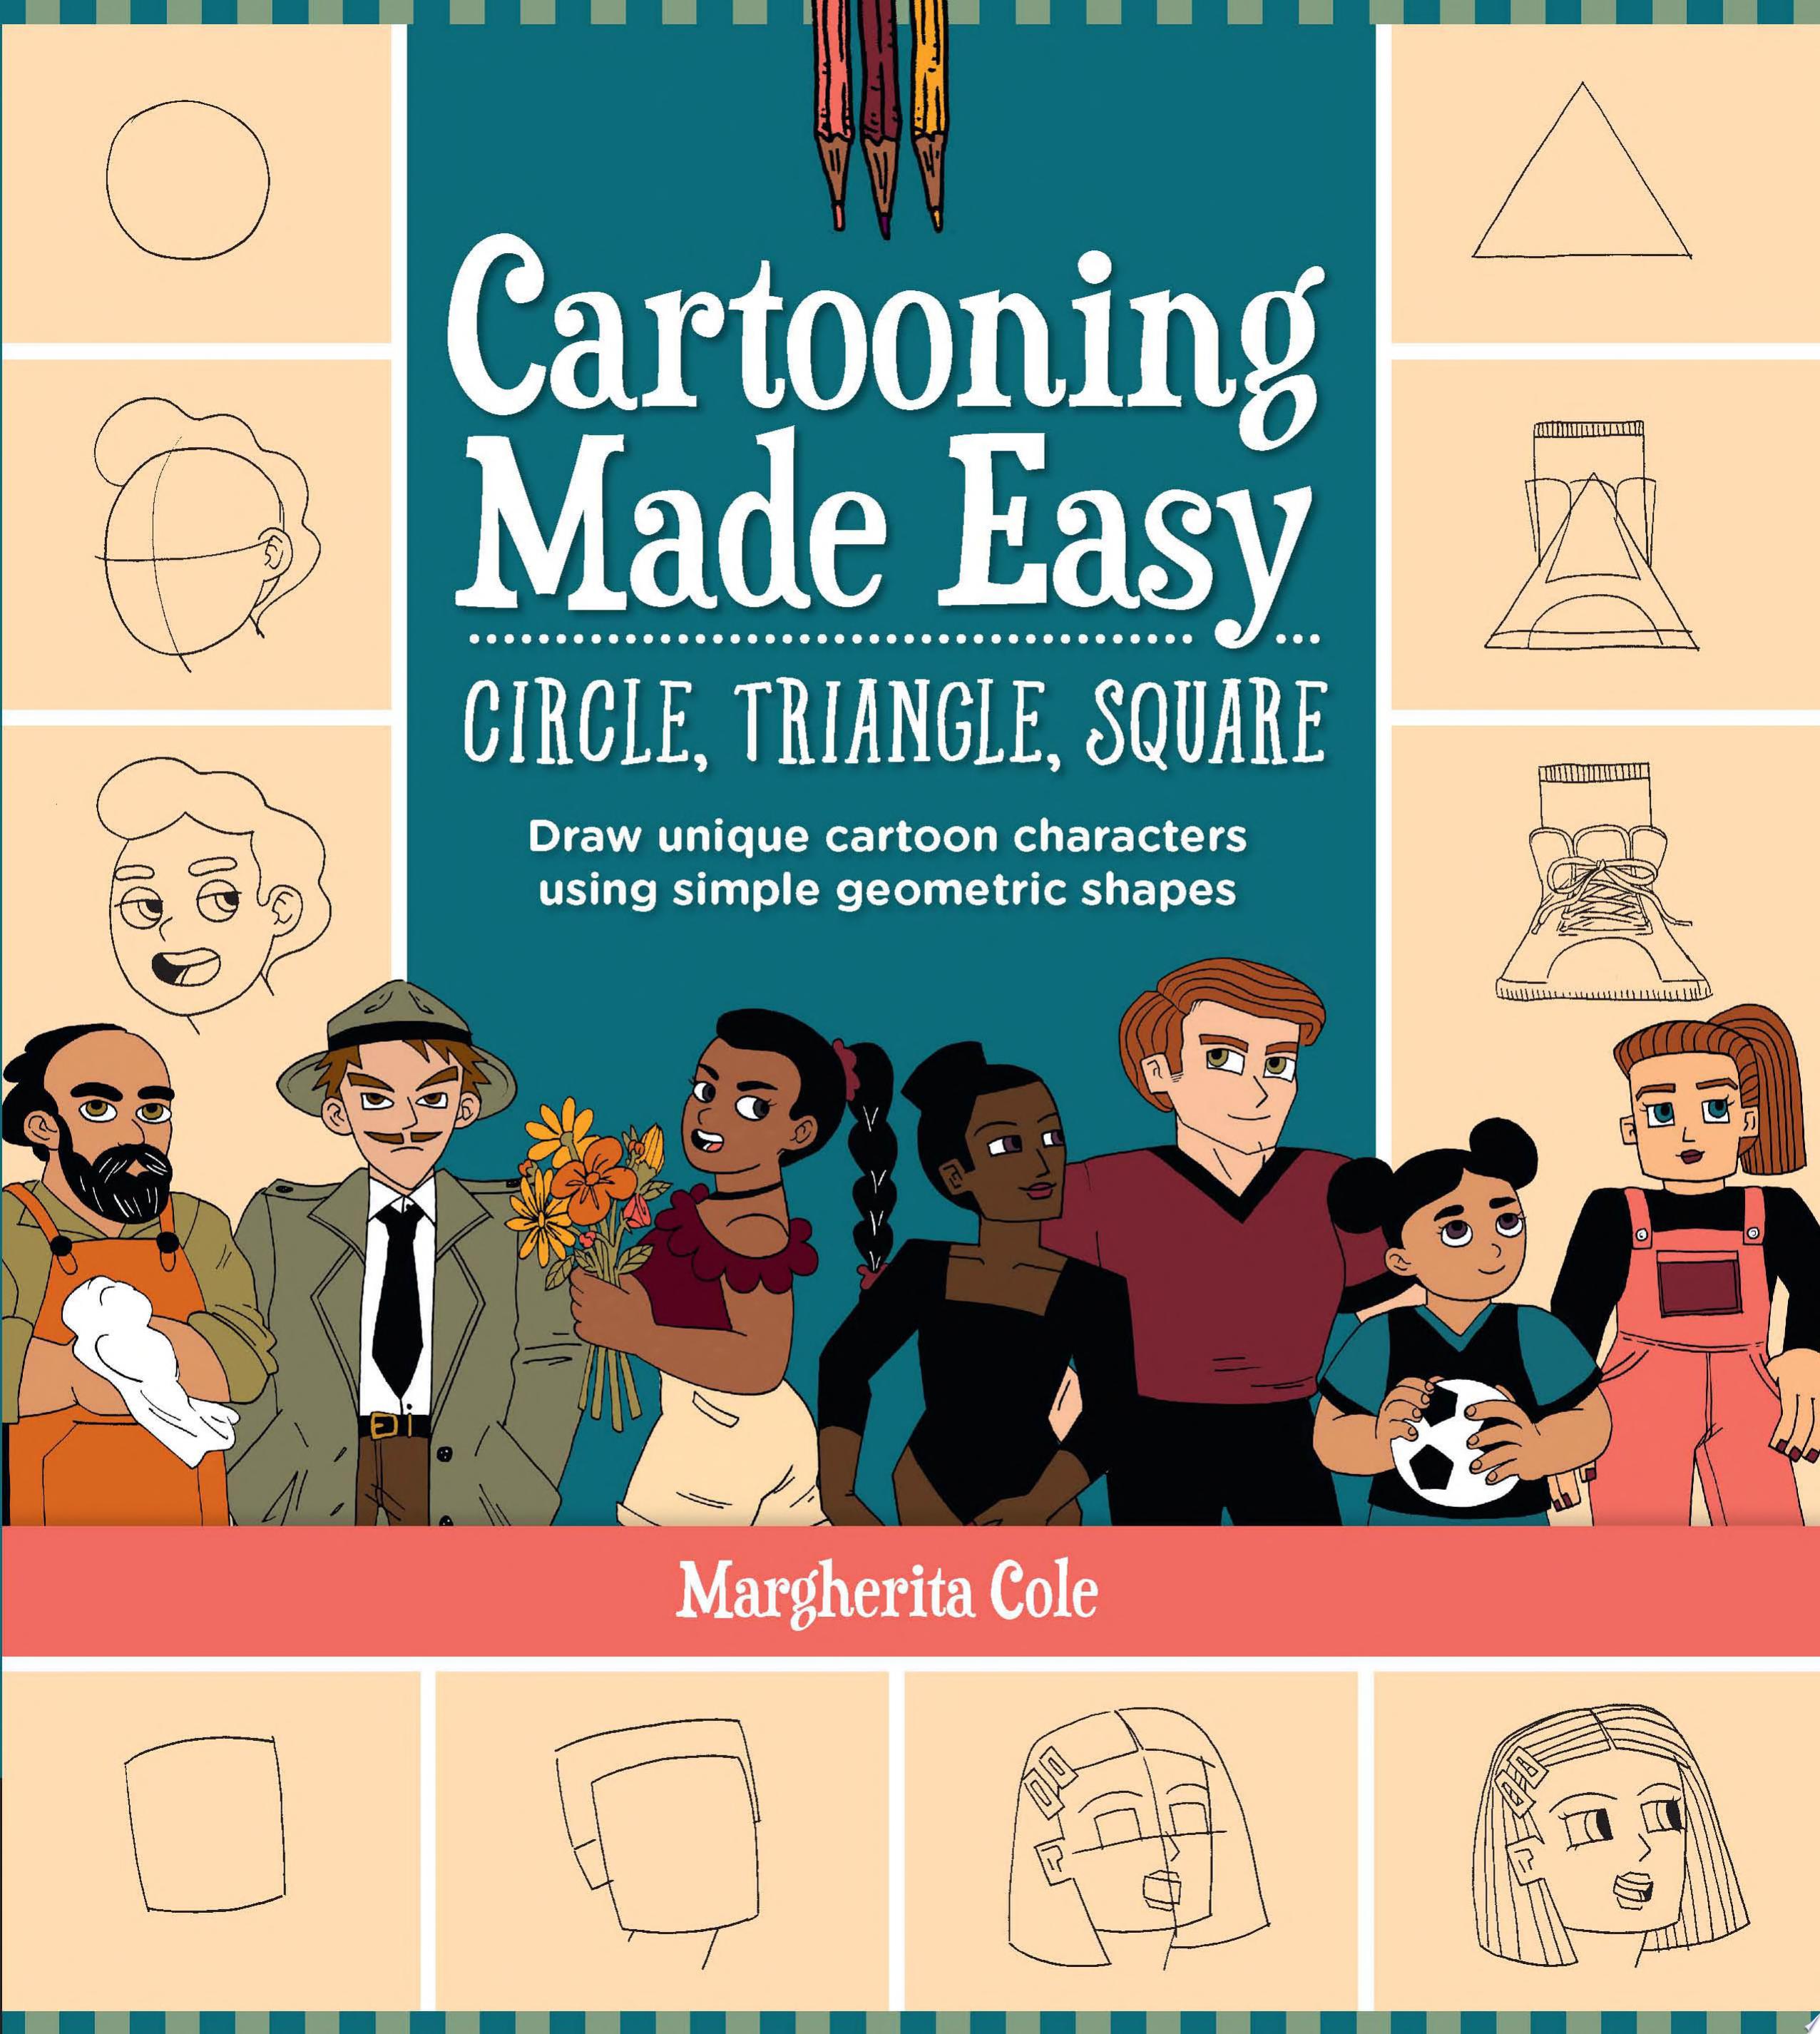 Image for "Cartooning Made Easy: Circle, Triangle, Square"